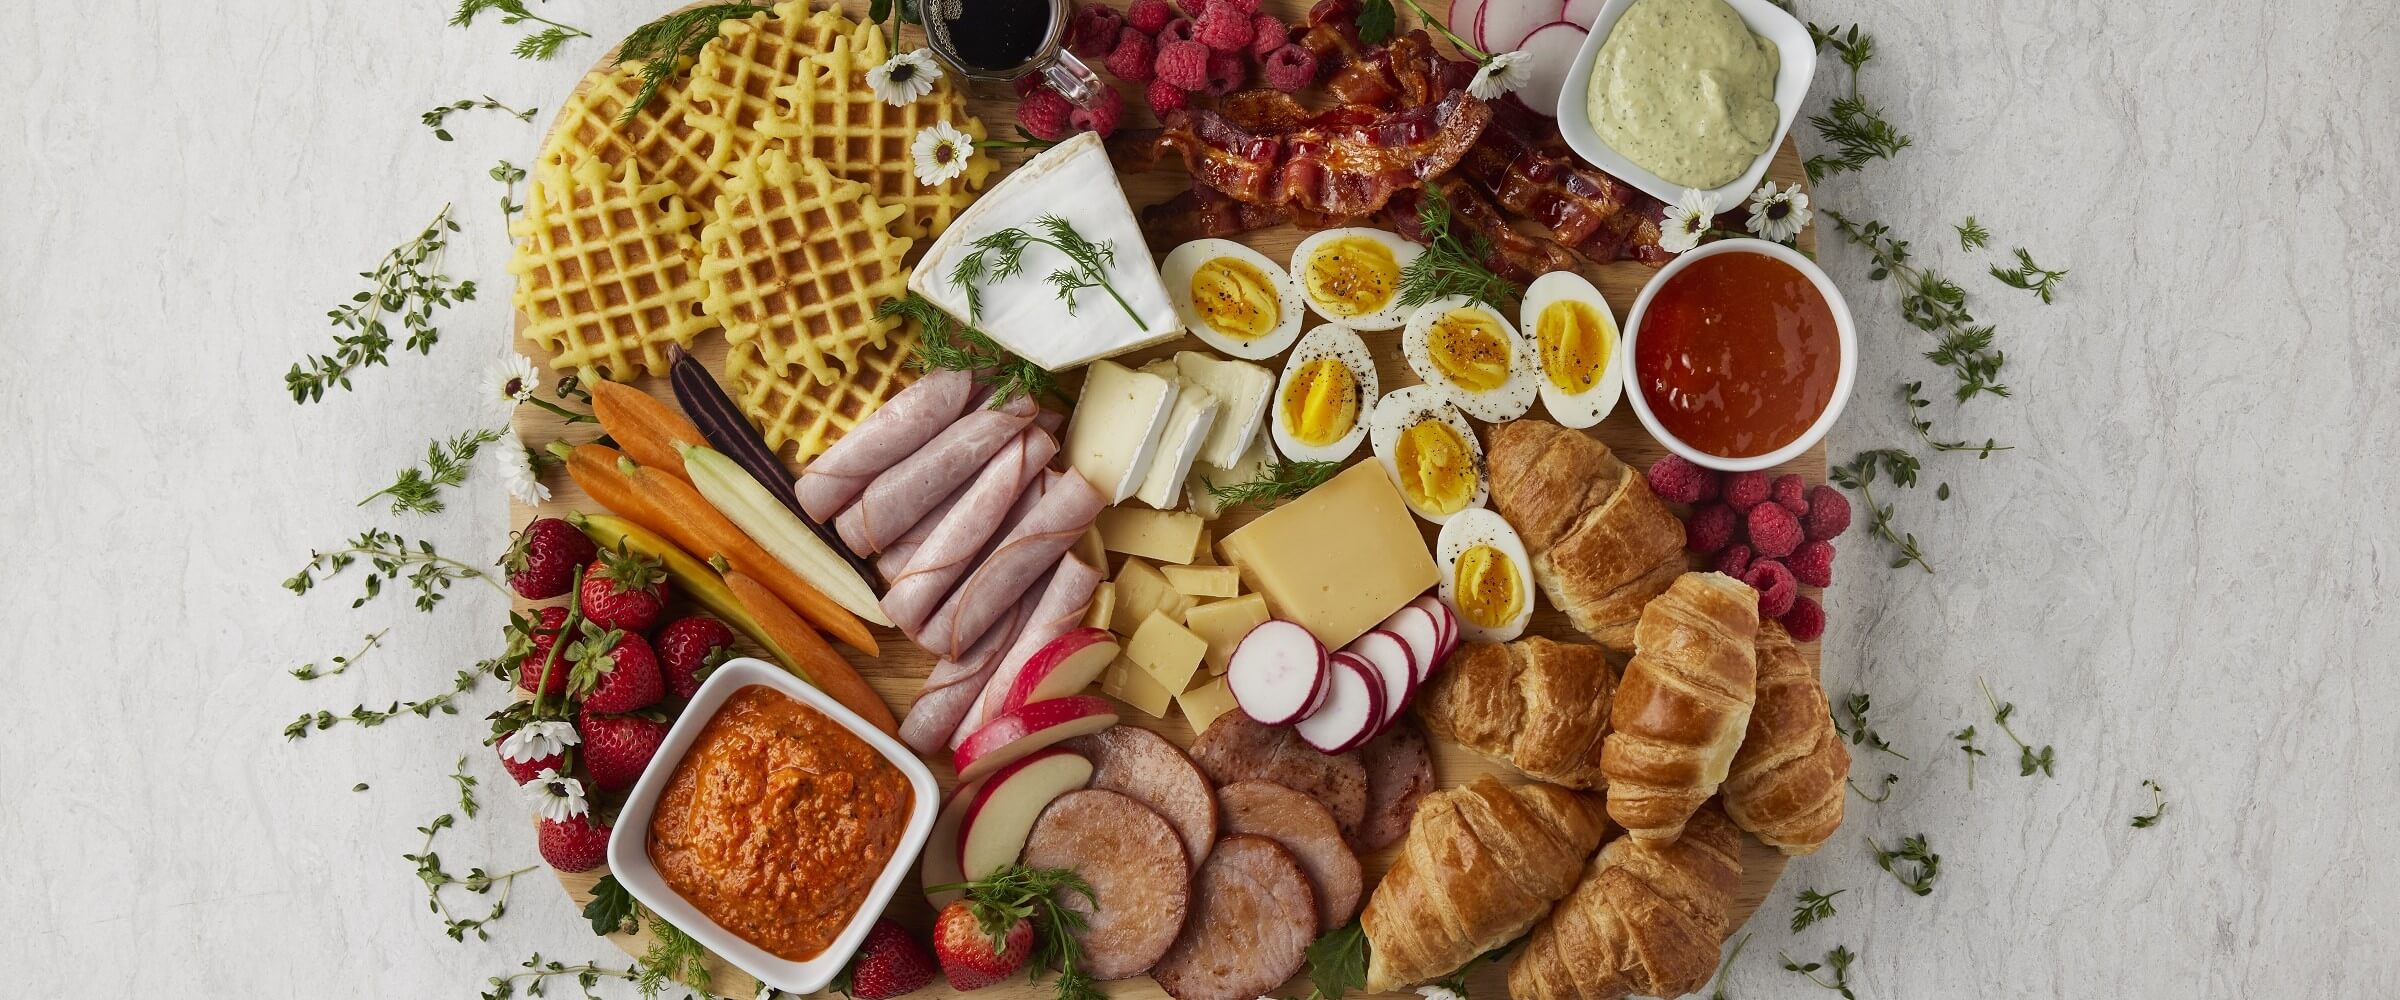 brunch board with meat, cheese, eggs, croissants, fruit, waffles, bacon and dip